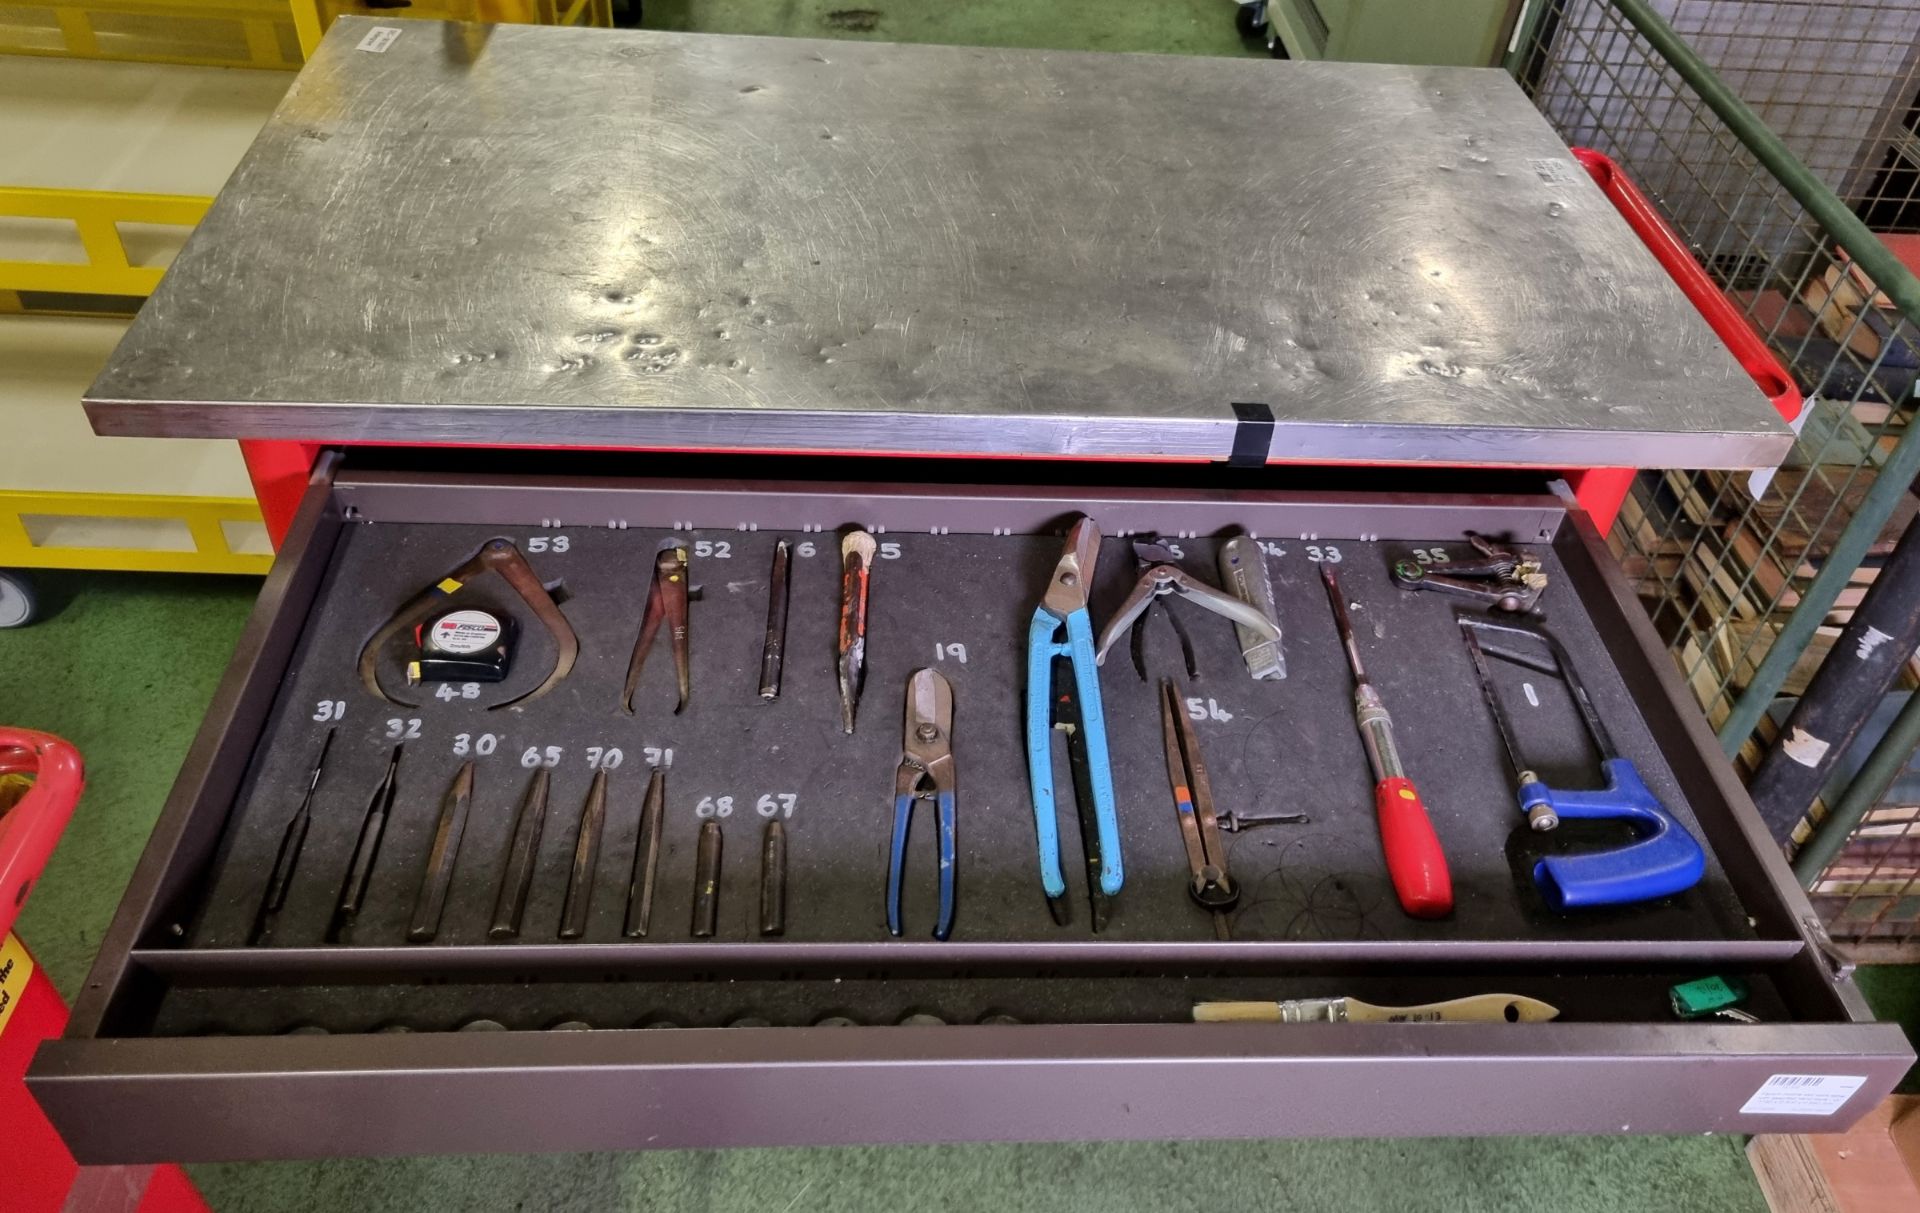 Facom mobile tool work table with assorted hand tools - W 1180 x D 600 x H 980mm - Image 6 of 6